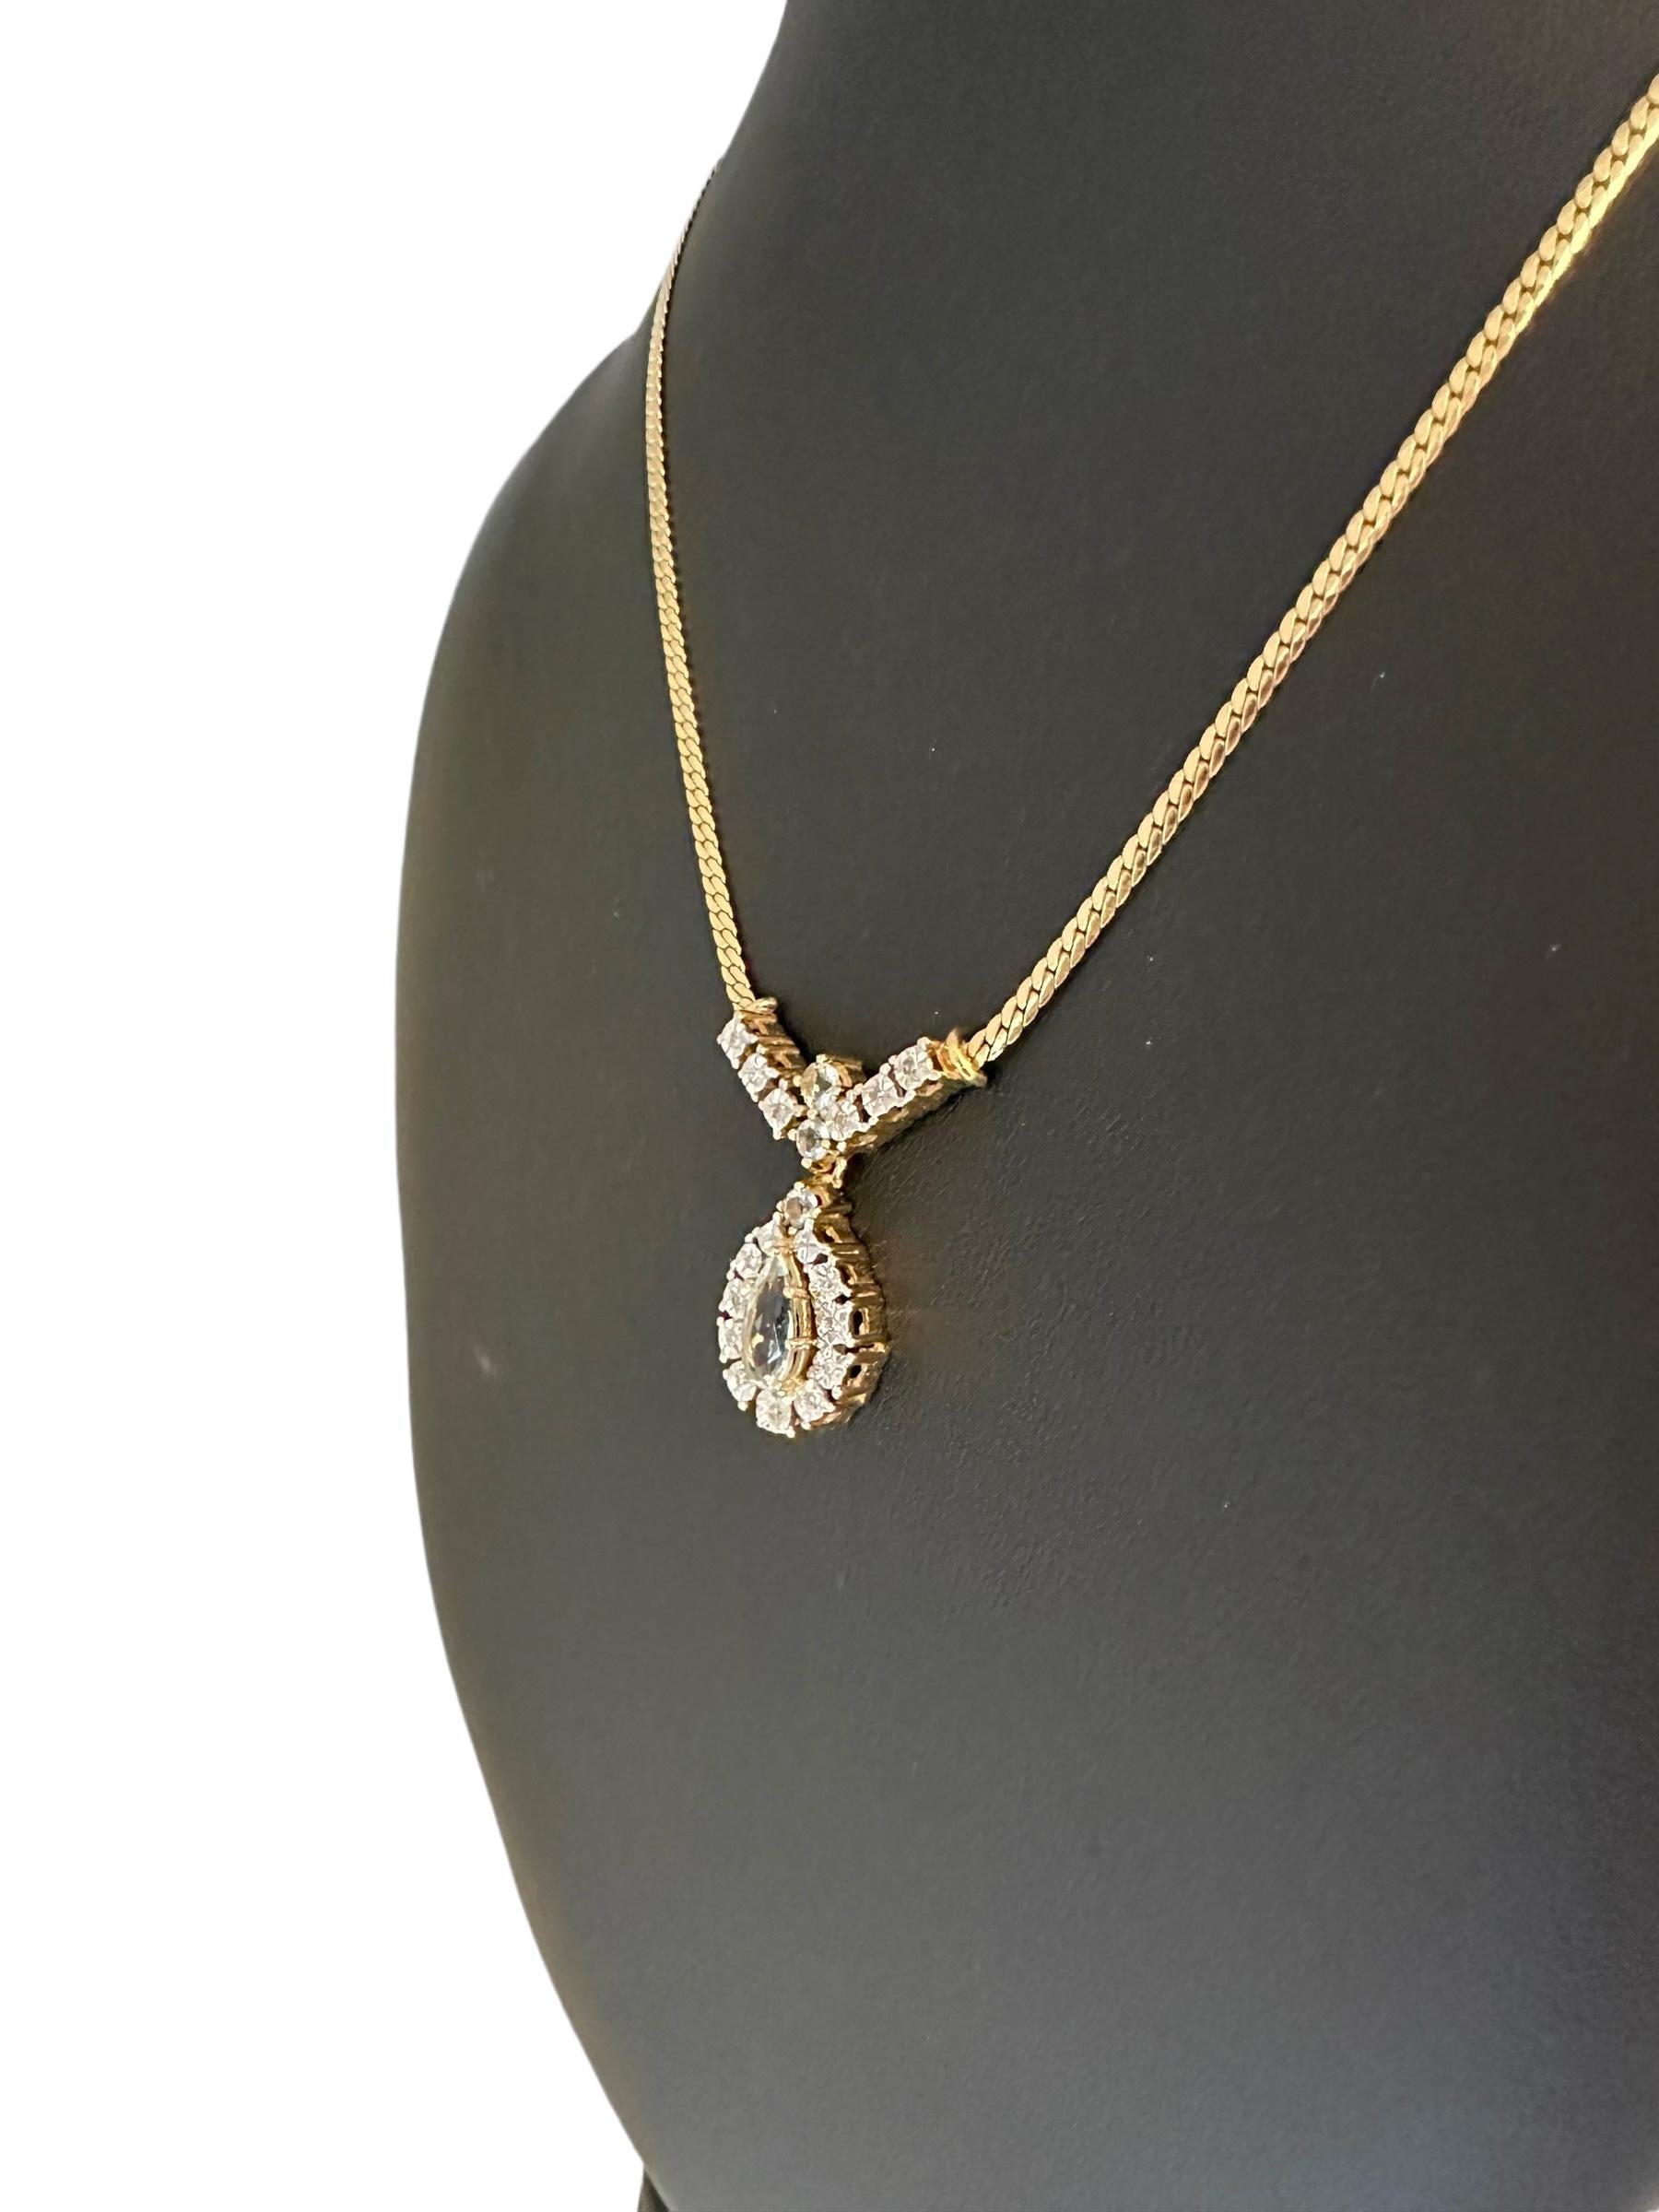 IGI Certified Gold Necklace with Diamonds and Aquamarines For Sale 4